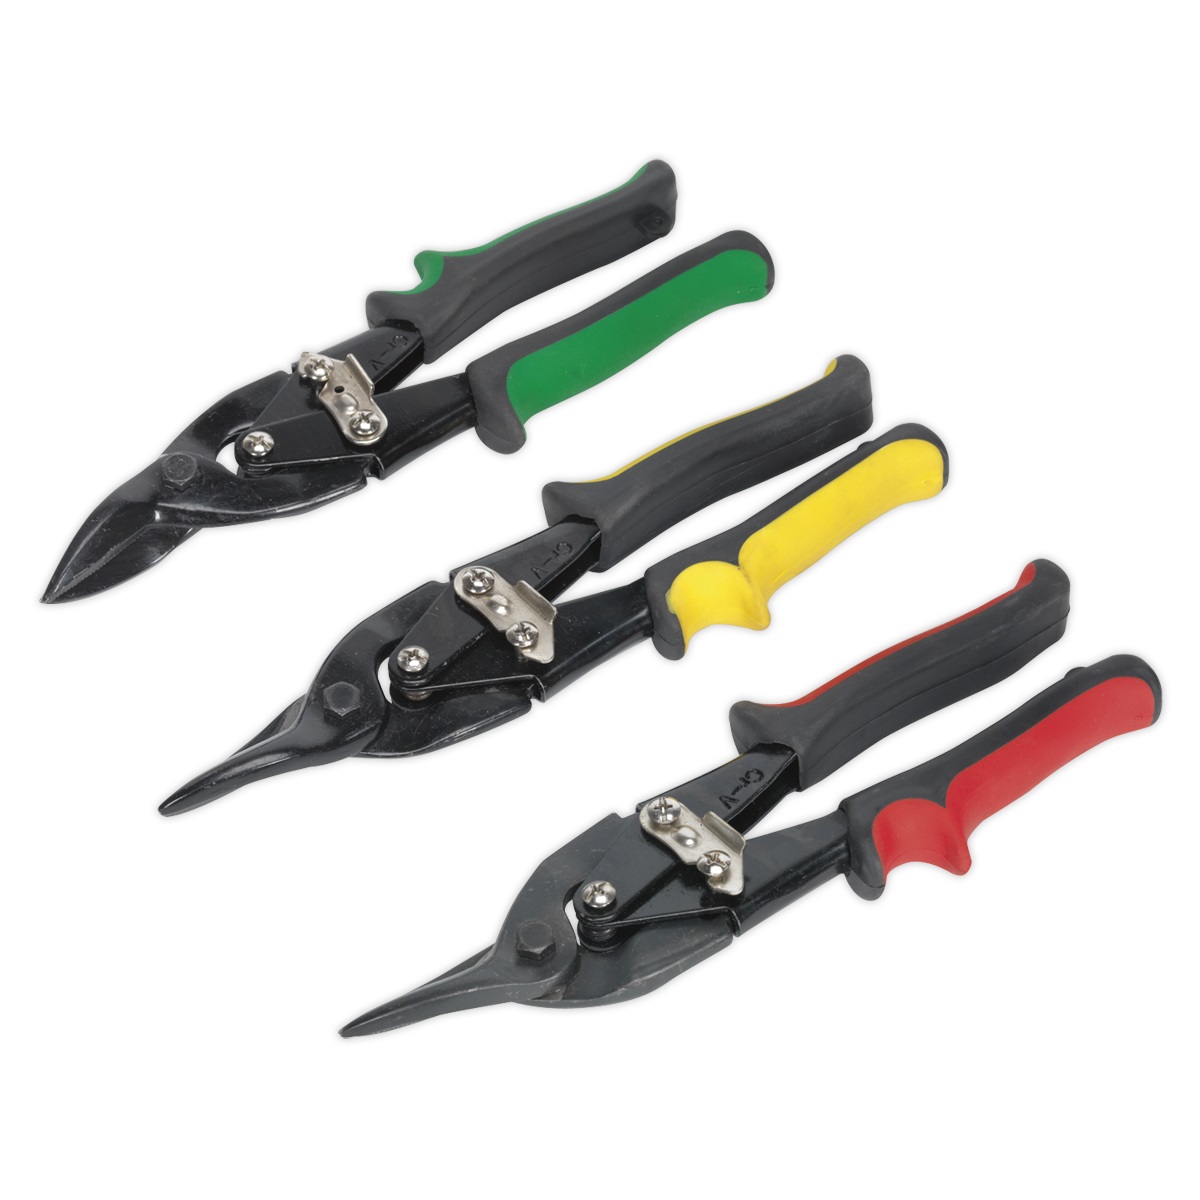 Aviation Tin Snips Set 3pc | Drop-forged, Chrome Vanadium, tempered steel blades with serrated jaws. | toolforce.ie